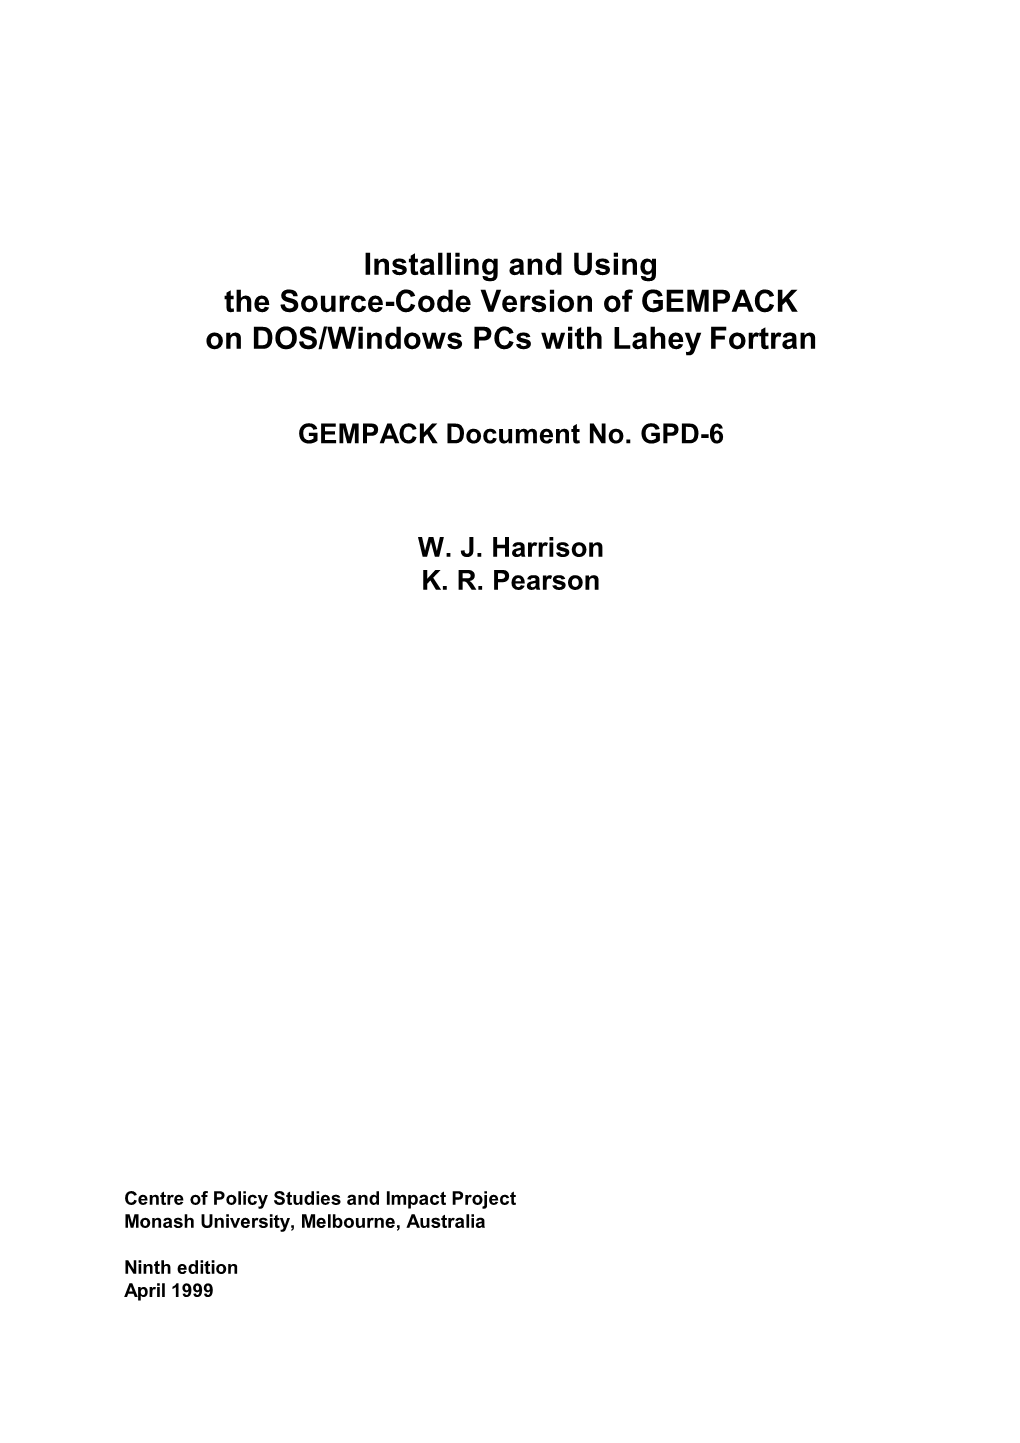 Installing and Using the Source-Code Version of GEMPACK on DOS/Windows Pcs with Lahey Fortran